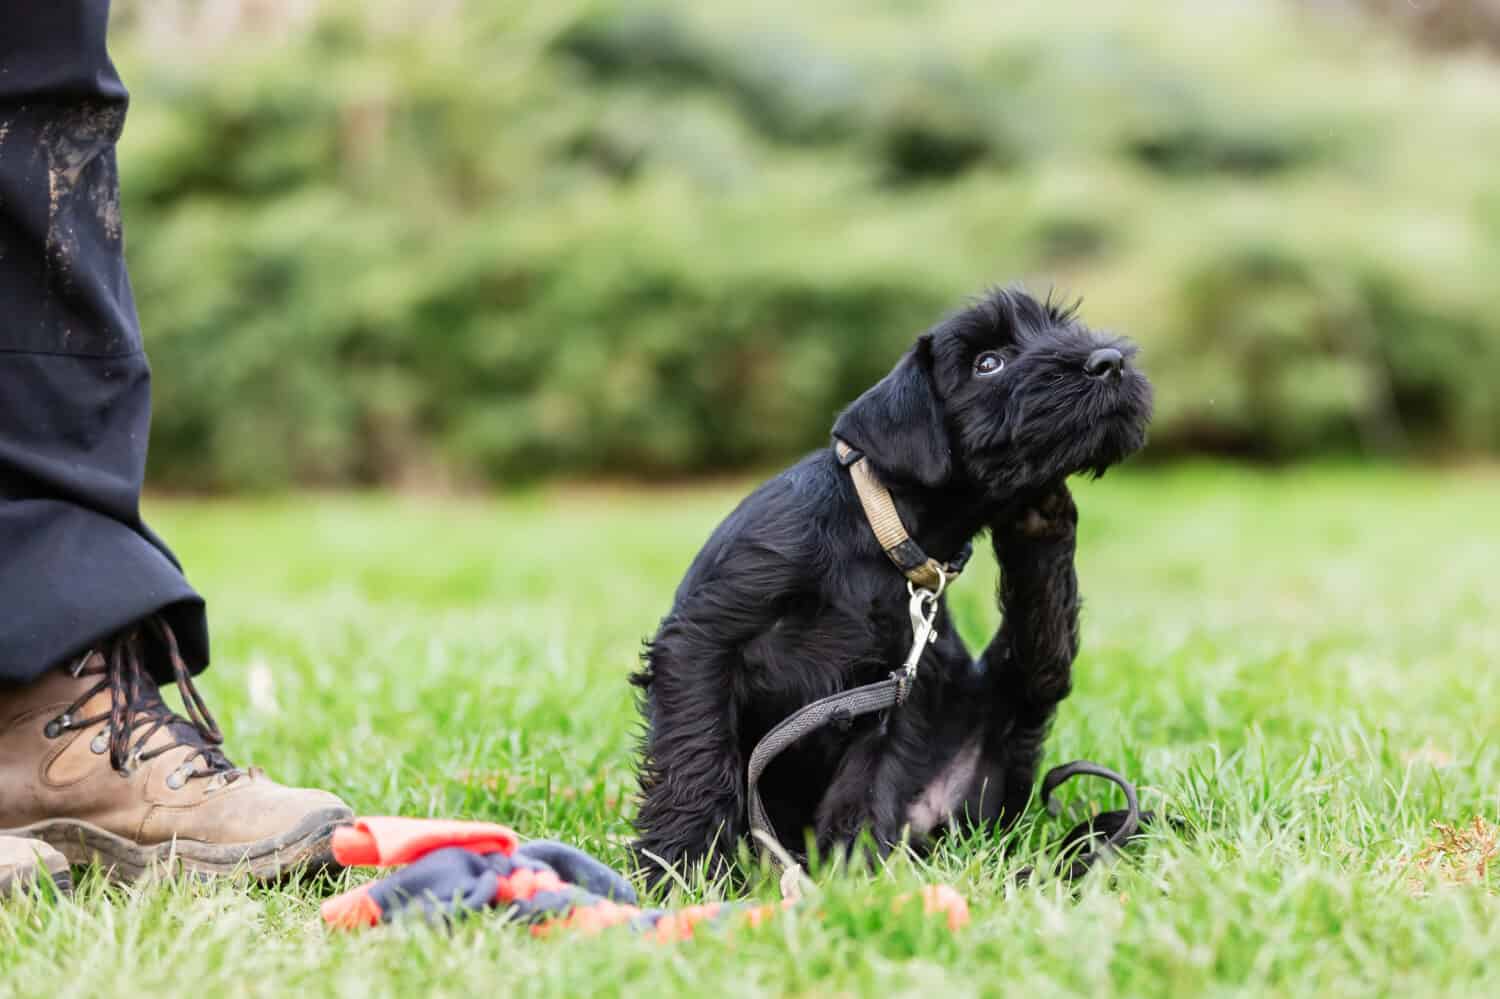 person trains with a standard schnauzer puppy on a dog training field